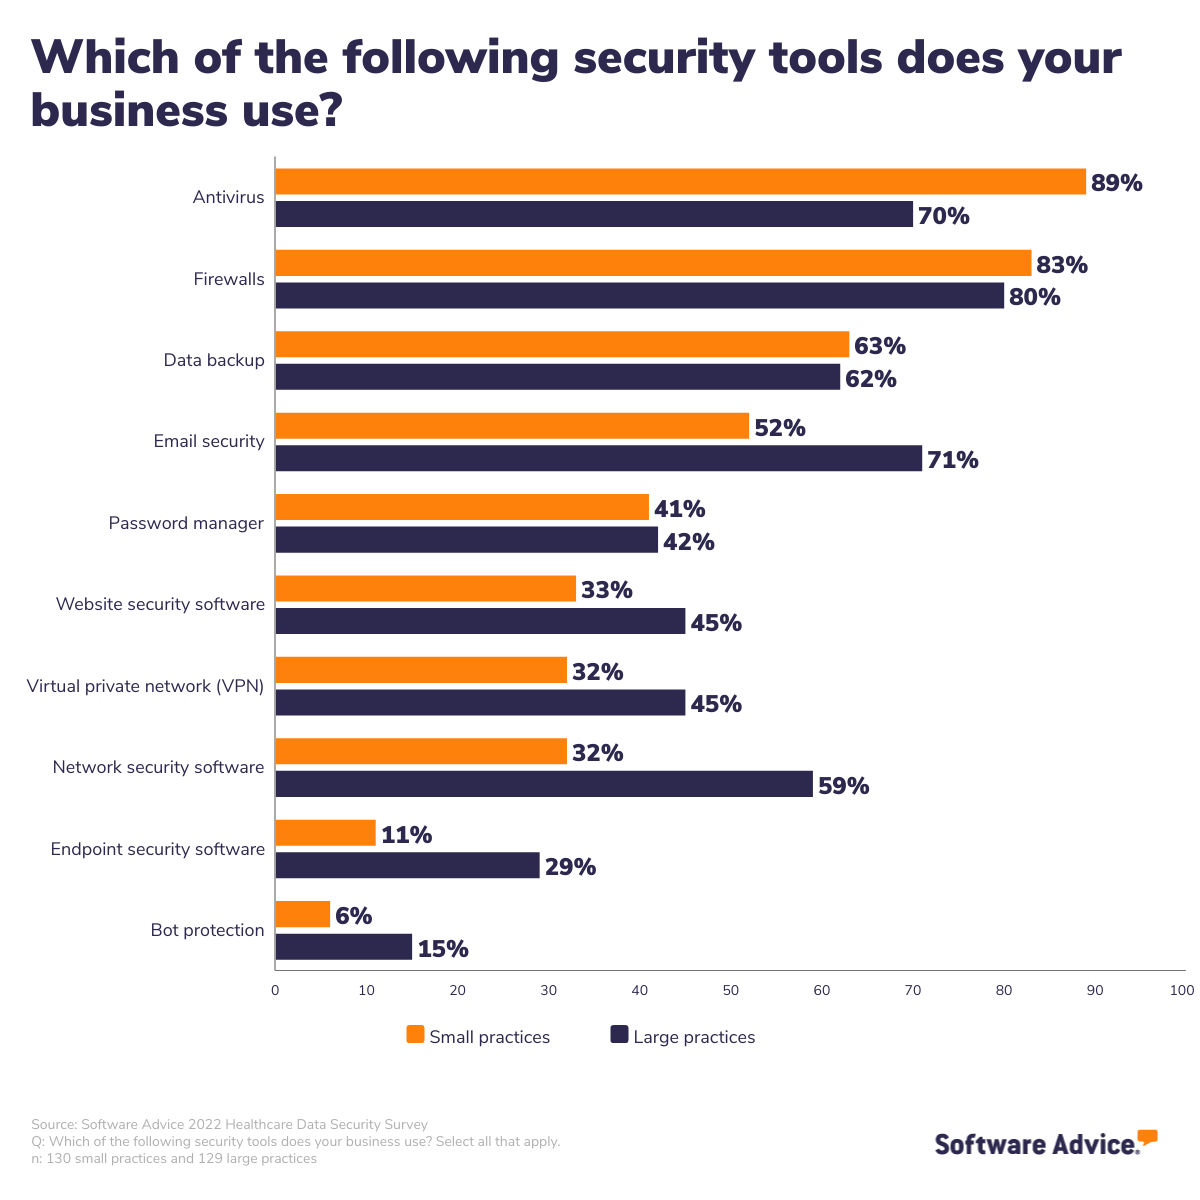 types-of-data-security-tools-used-by-small-and-large-practices